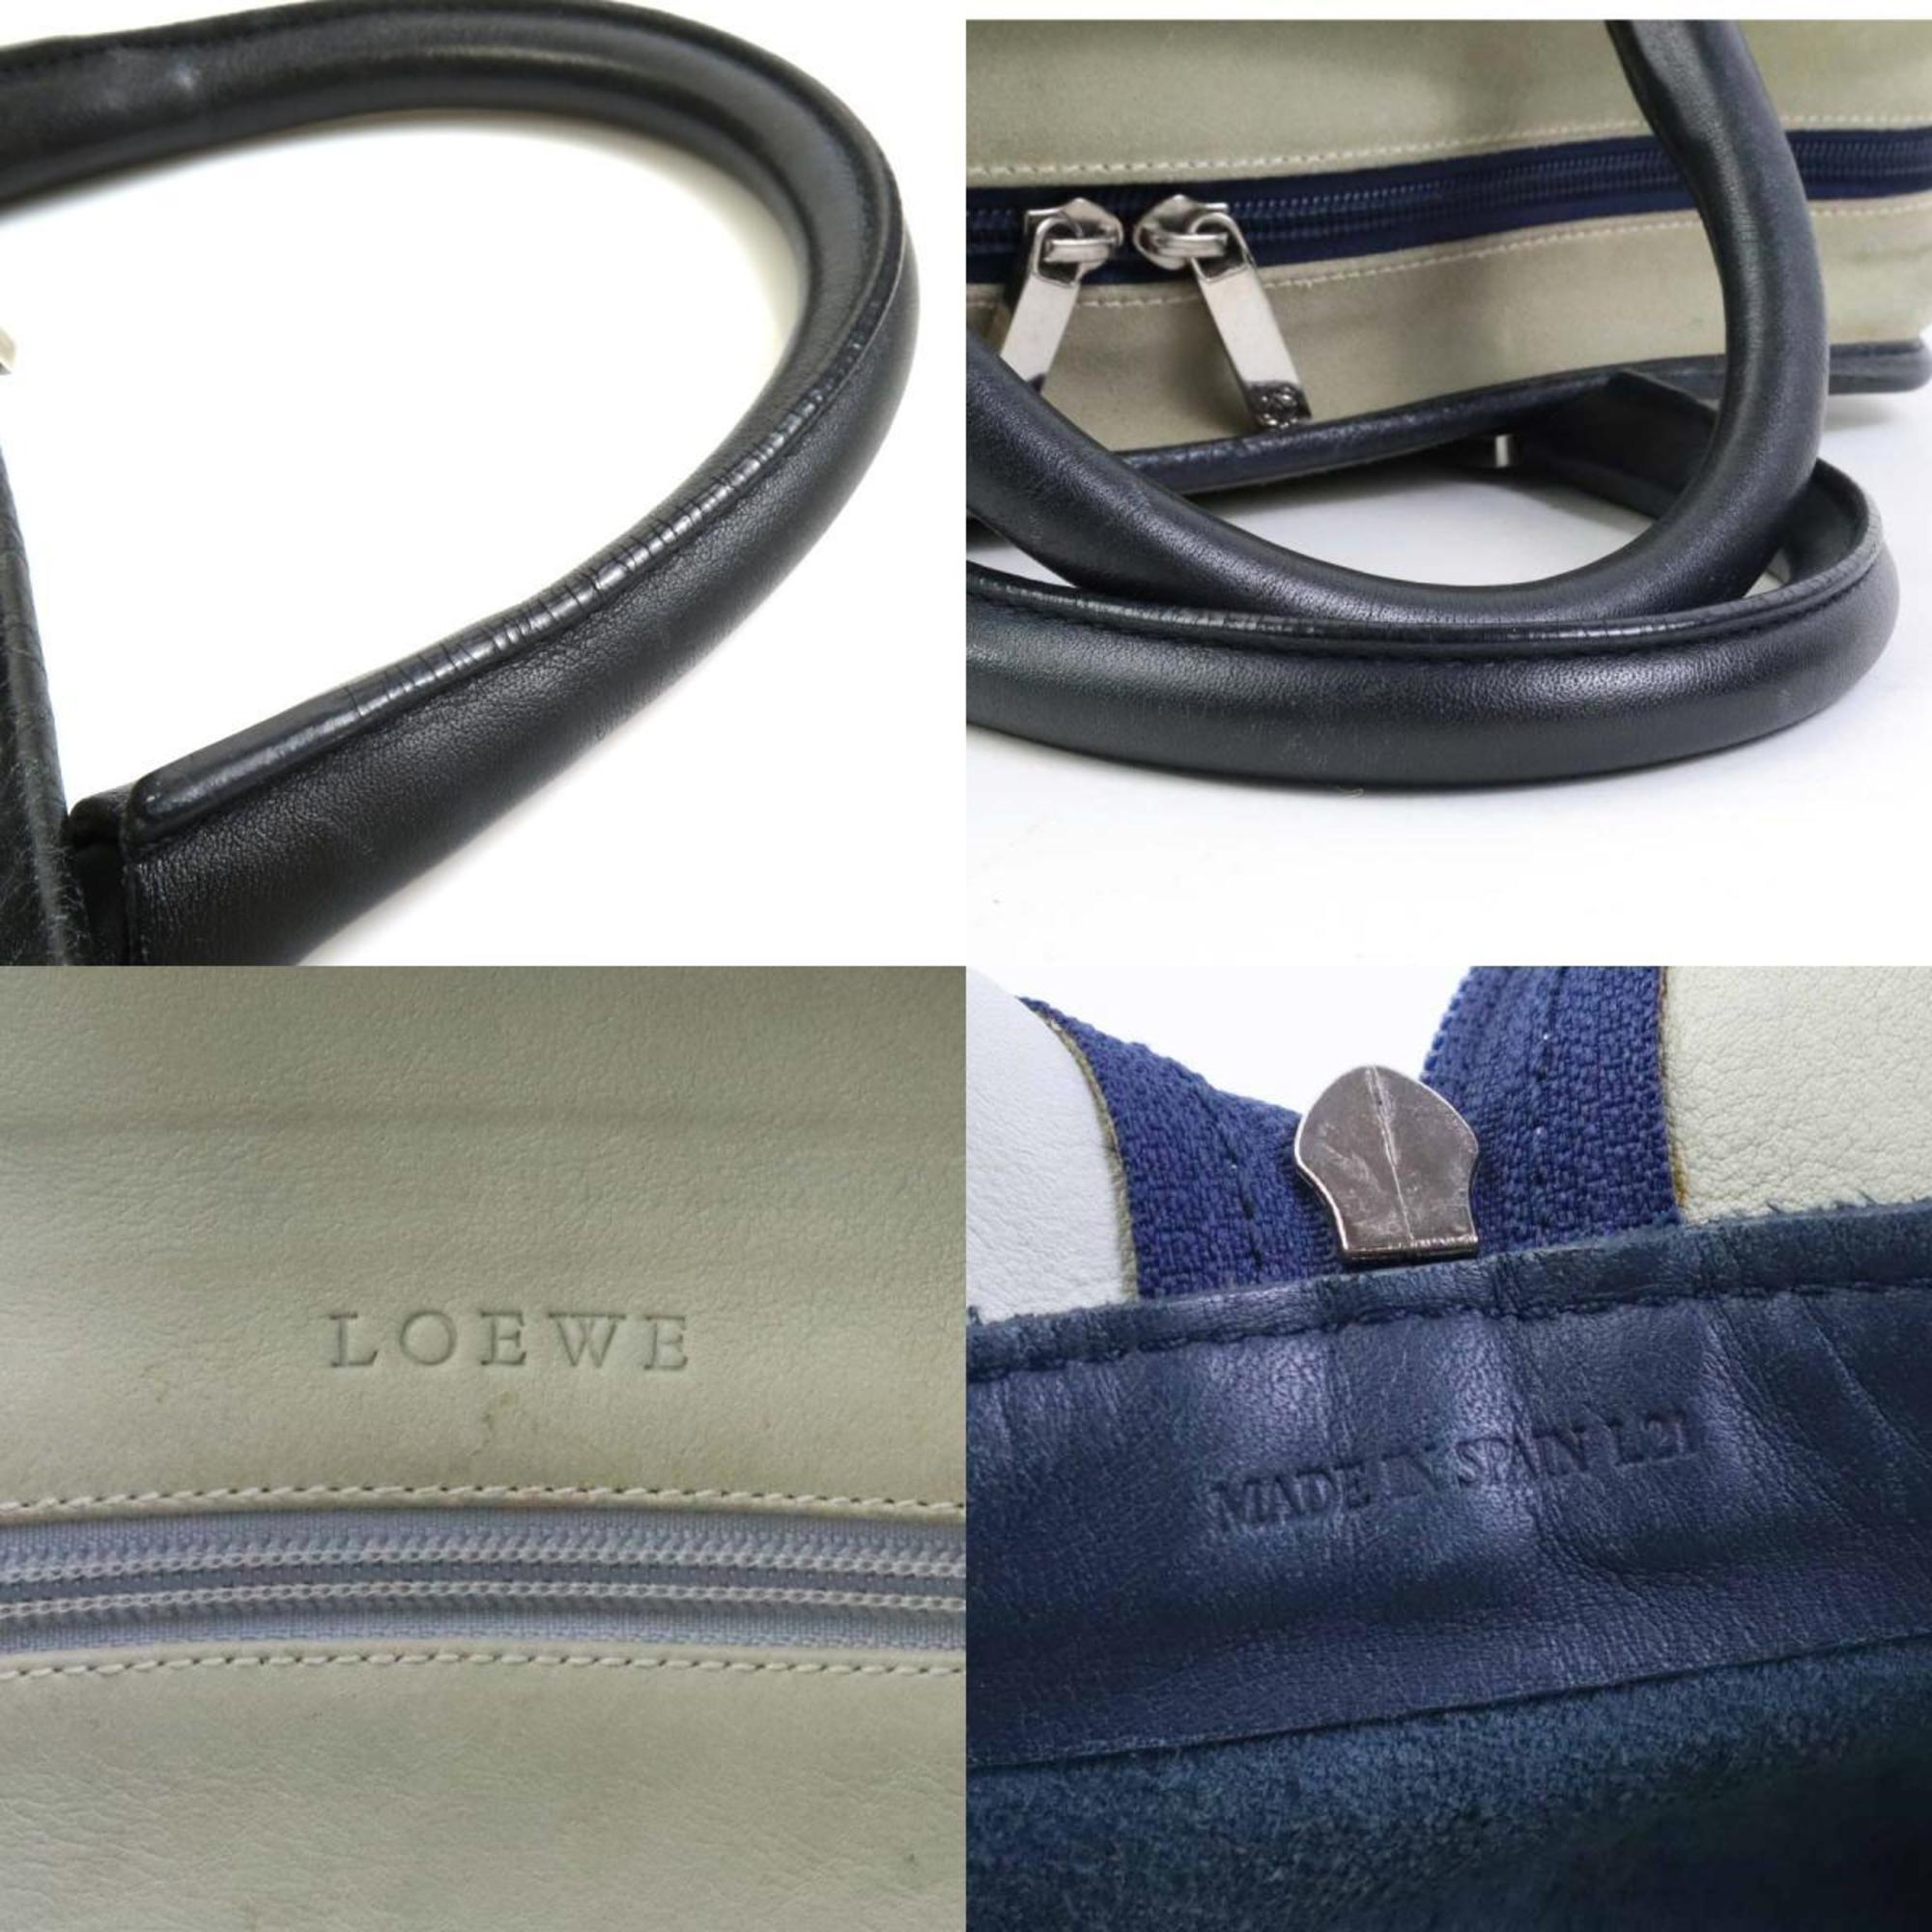 LOEWE Amazona handbag in suede and leather, light green, black silver, for women, e58742a